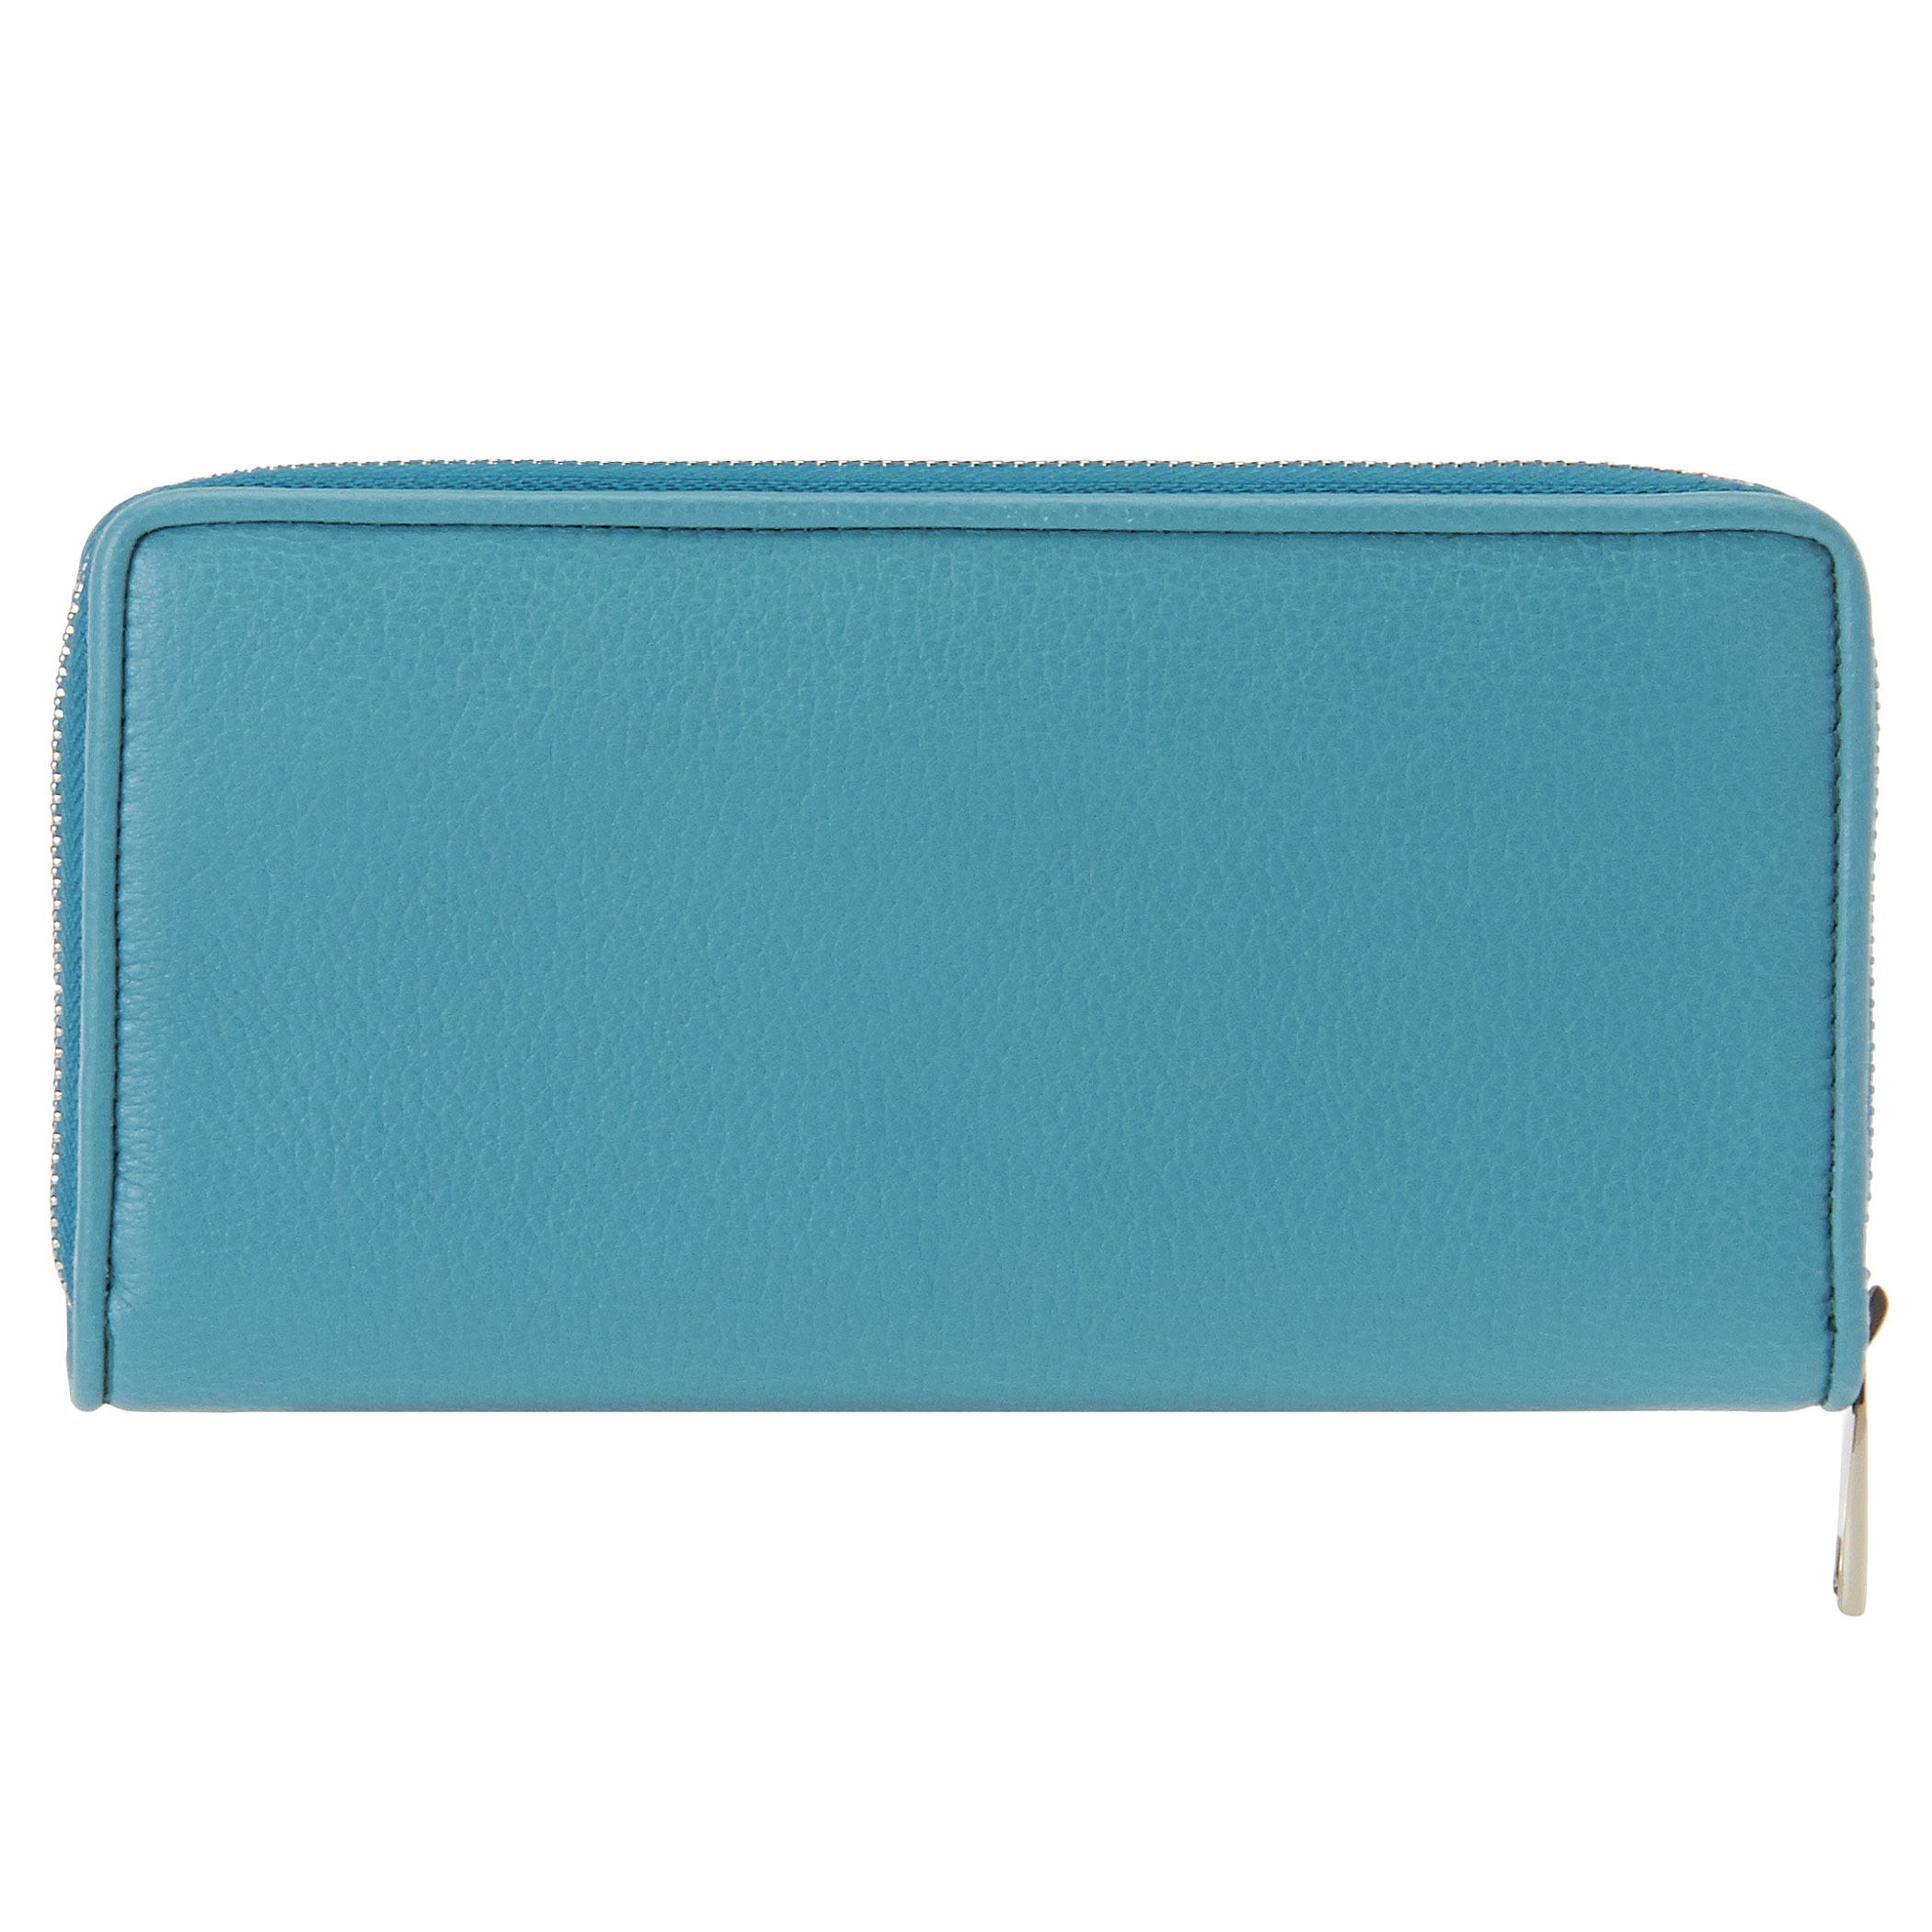 Nine west Mercer Pebbled Leather Zip Around Leather Wallet in Blue | Lyst